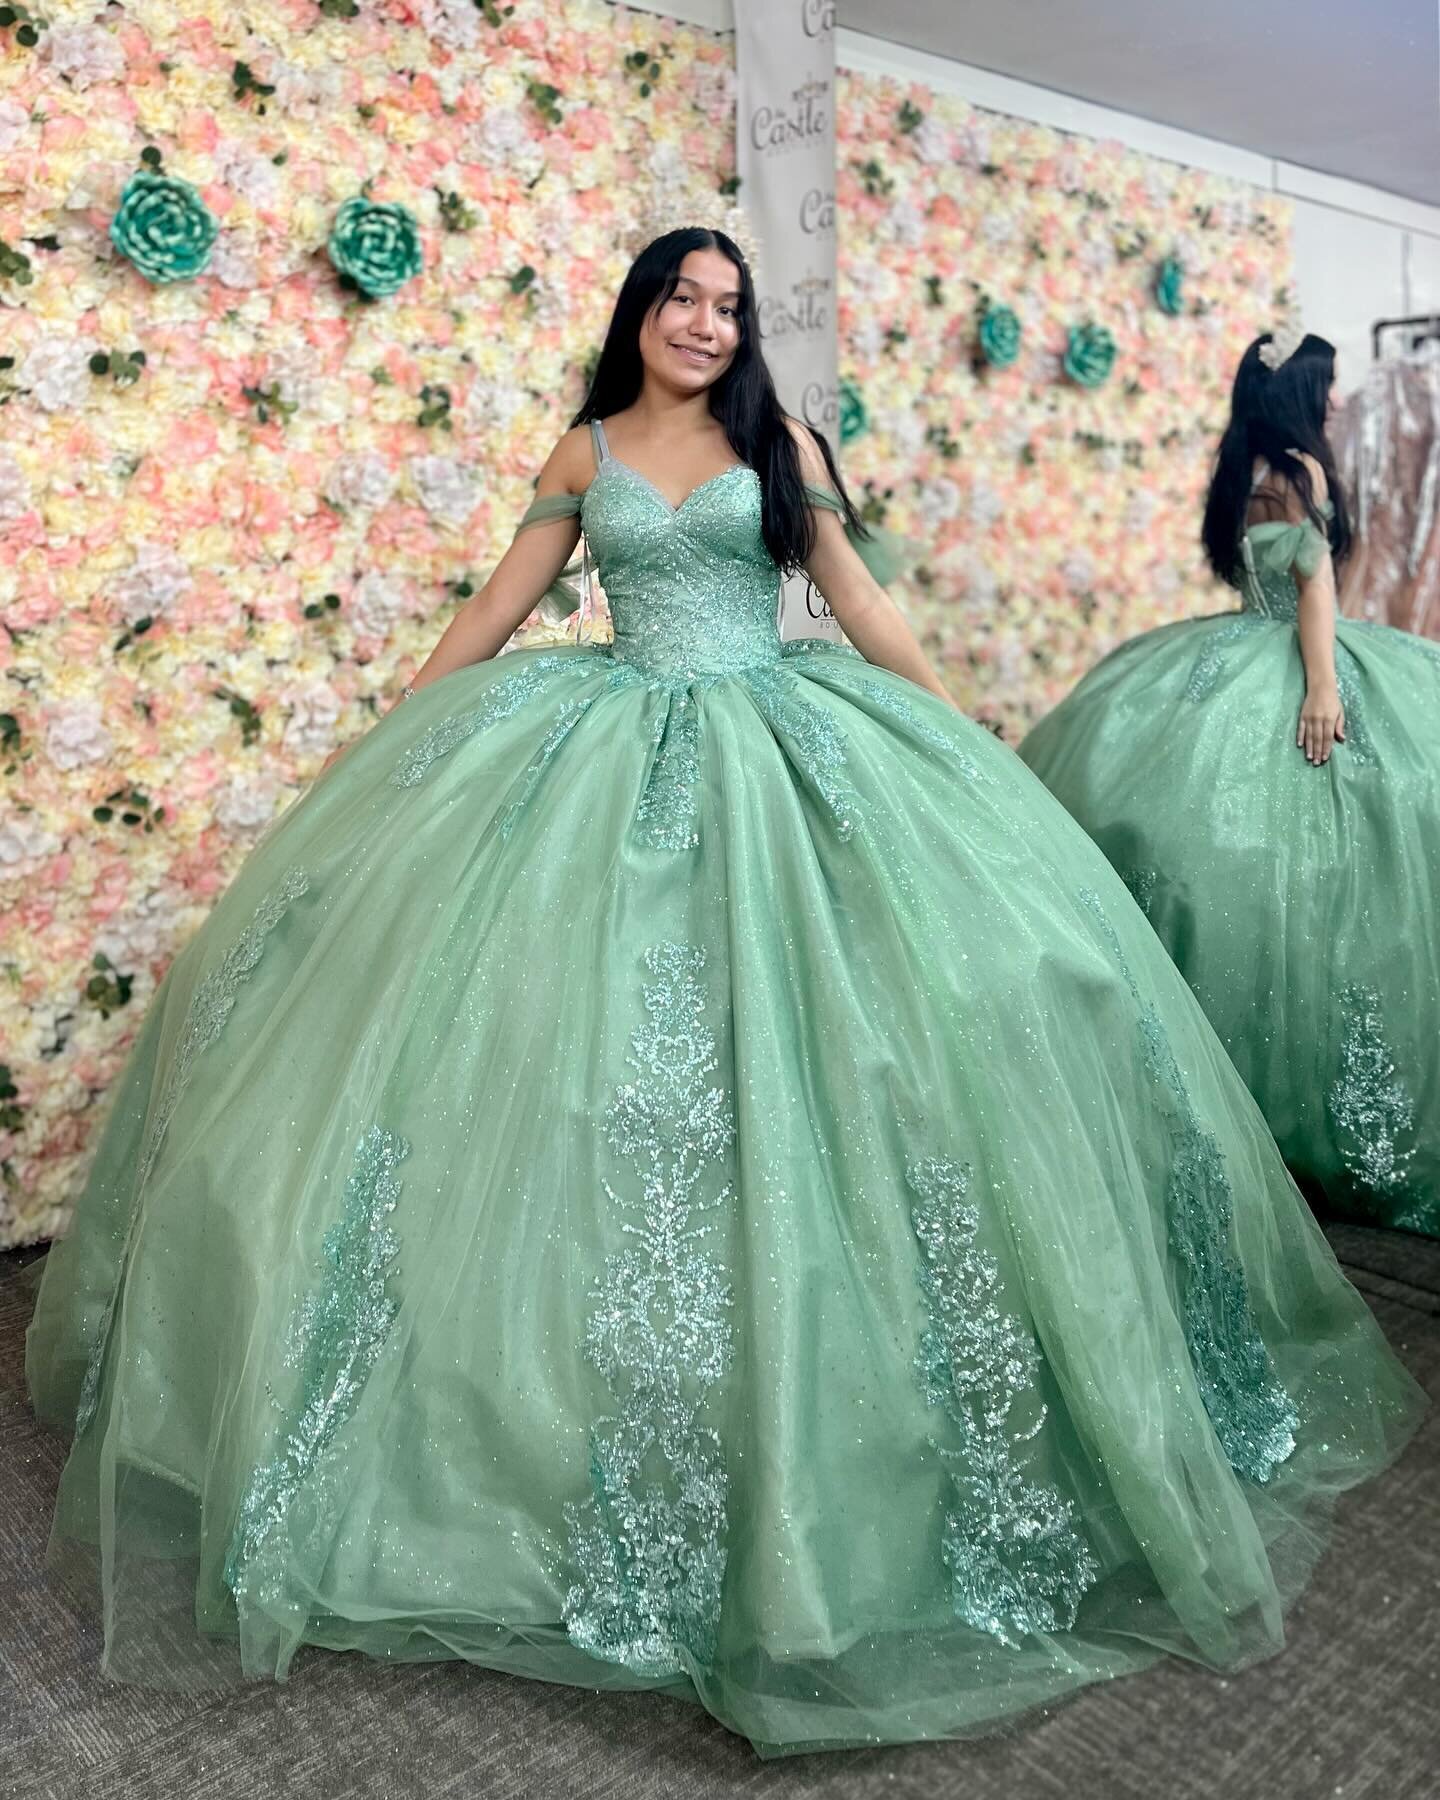 She said yes to the dress! 💚✨
✨
✨✨
✨✨✨
✨✨✨✨
✨✨✨✨✨
✨✨✨✨
✨✨✨
✨✨
✨
#mycastleboutique #pearland #pearlandtx #quincea&ntilde;era #quinceanera #quince #ballgown #sweet15 #dresses #partydress #vestidosdequince #xv #prom #dress #quinceaneradress #quincea&nt